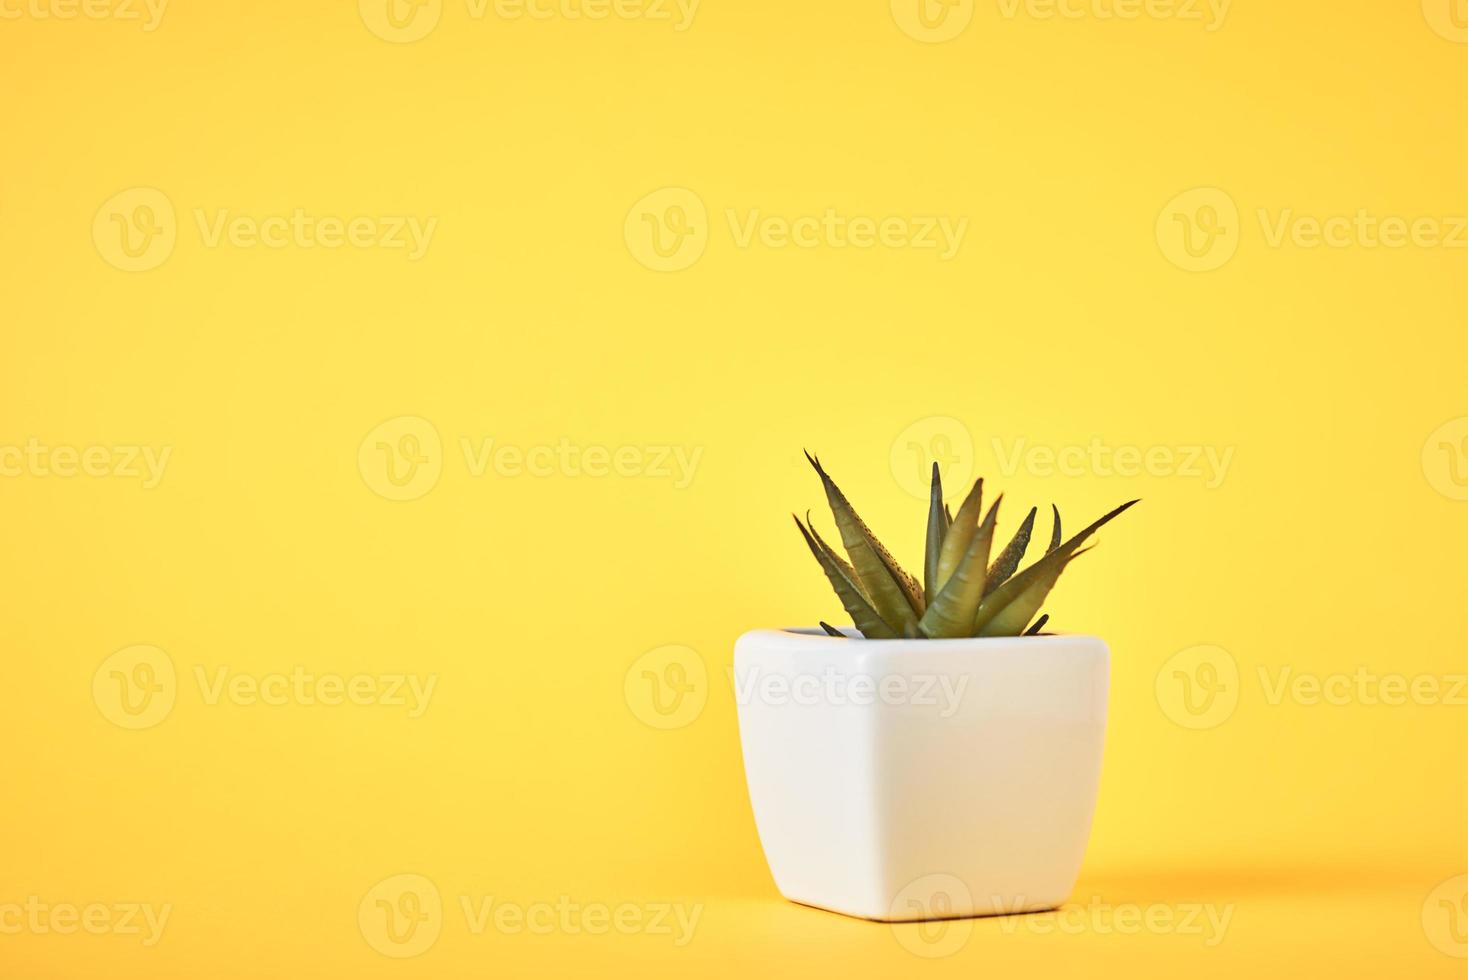 Succulent plant in white pot on the yellow background photo